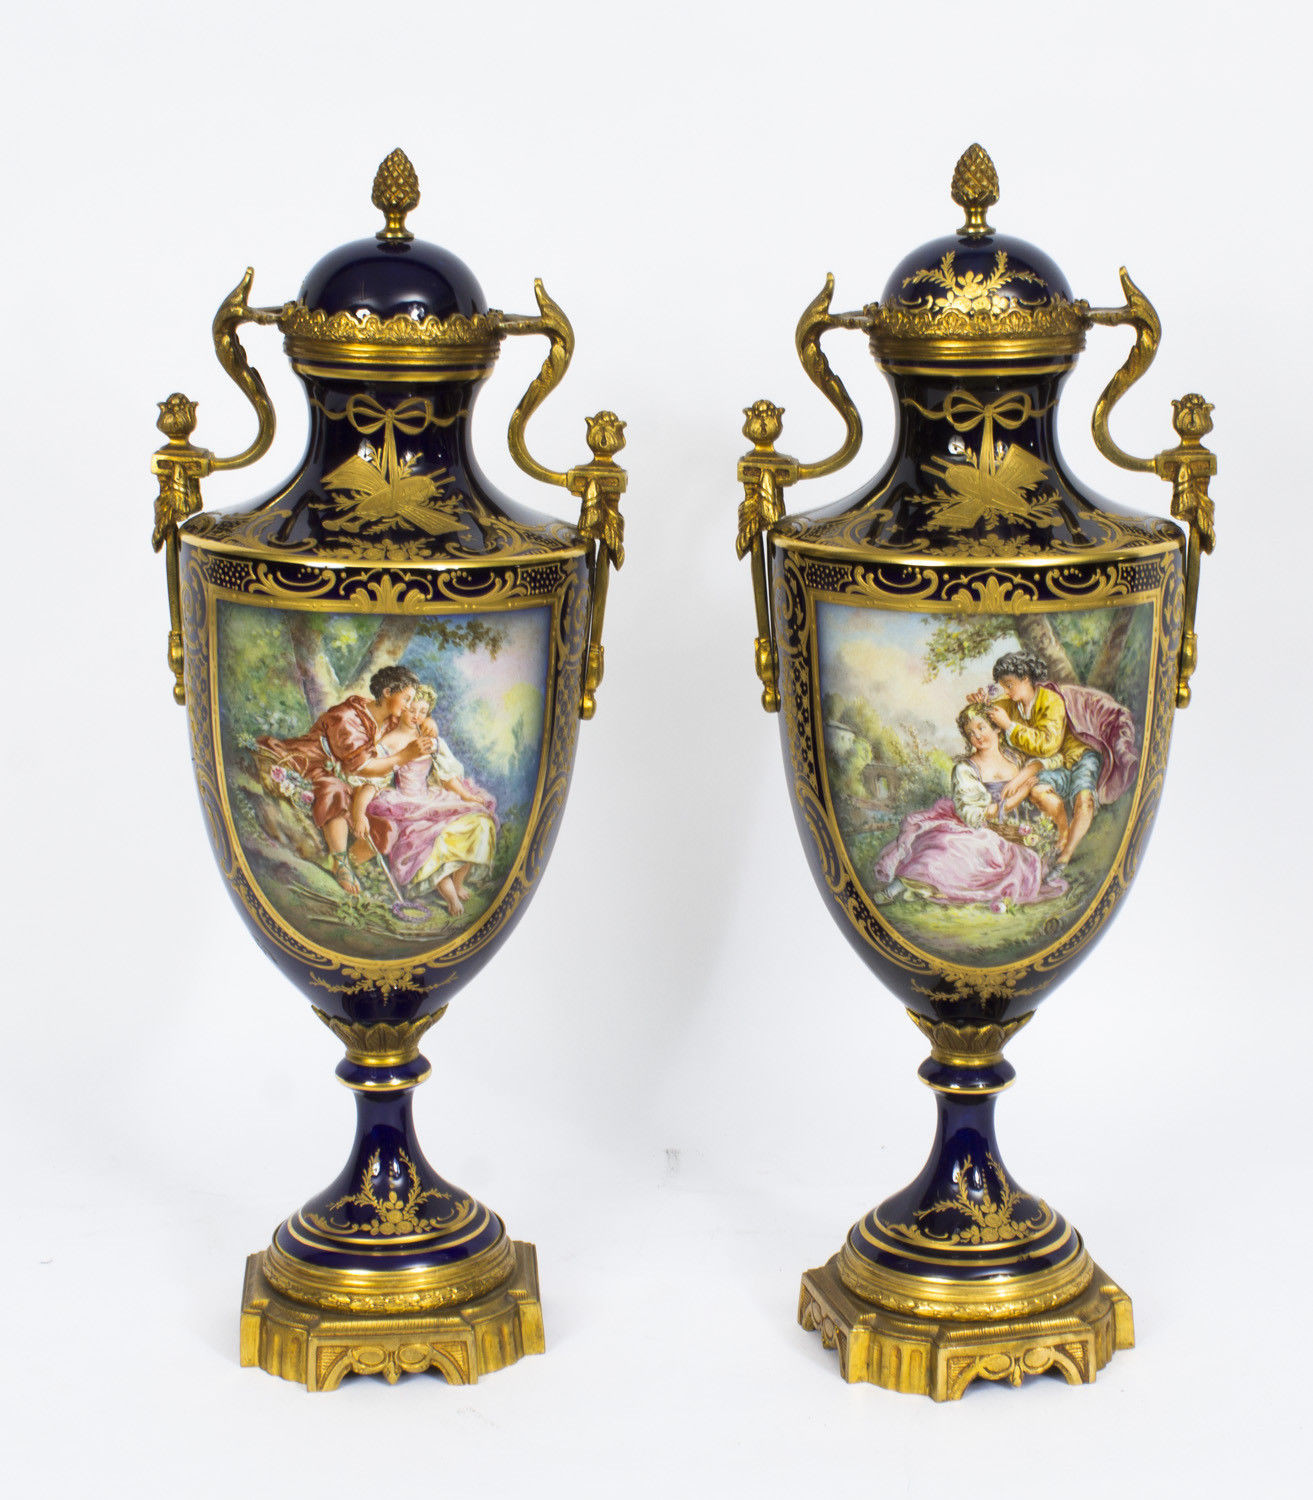 sevres porcelain vase of antique pair ormolu mounted sevres style lidded urns vases c1910 in 1 of 1only 1 available